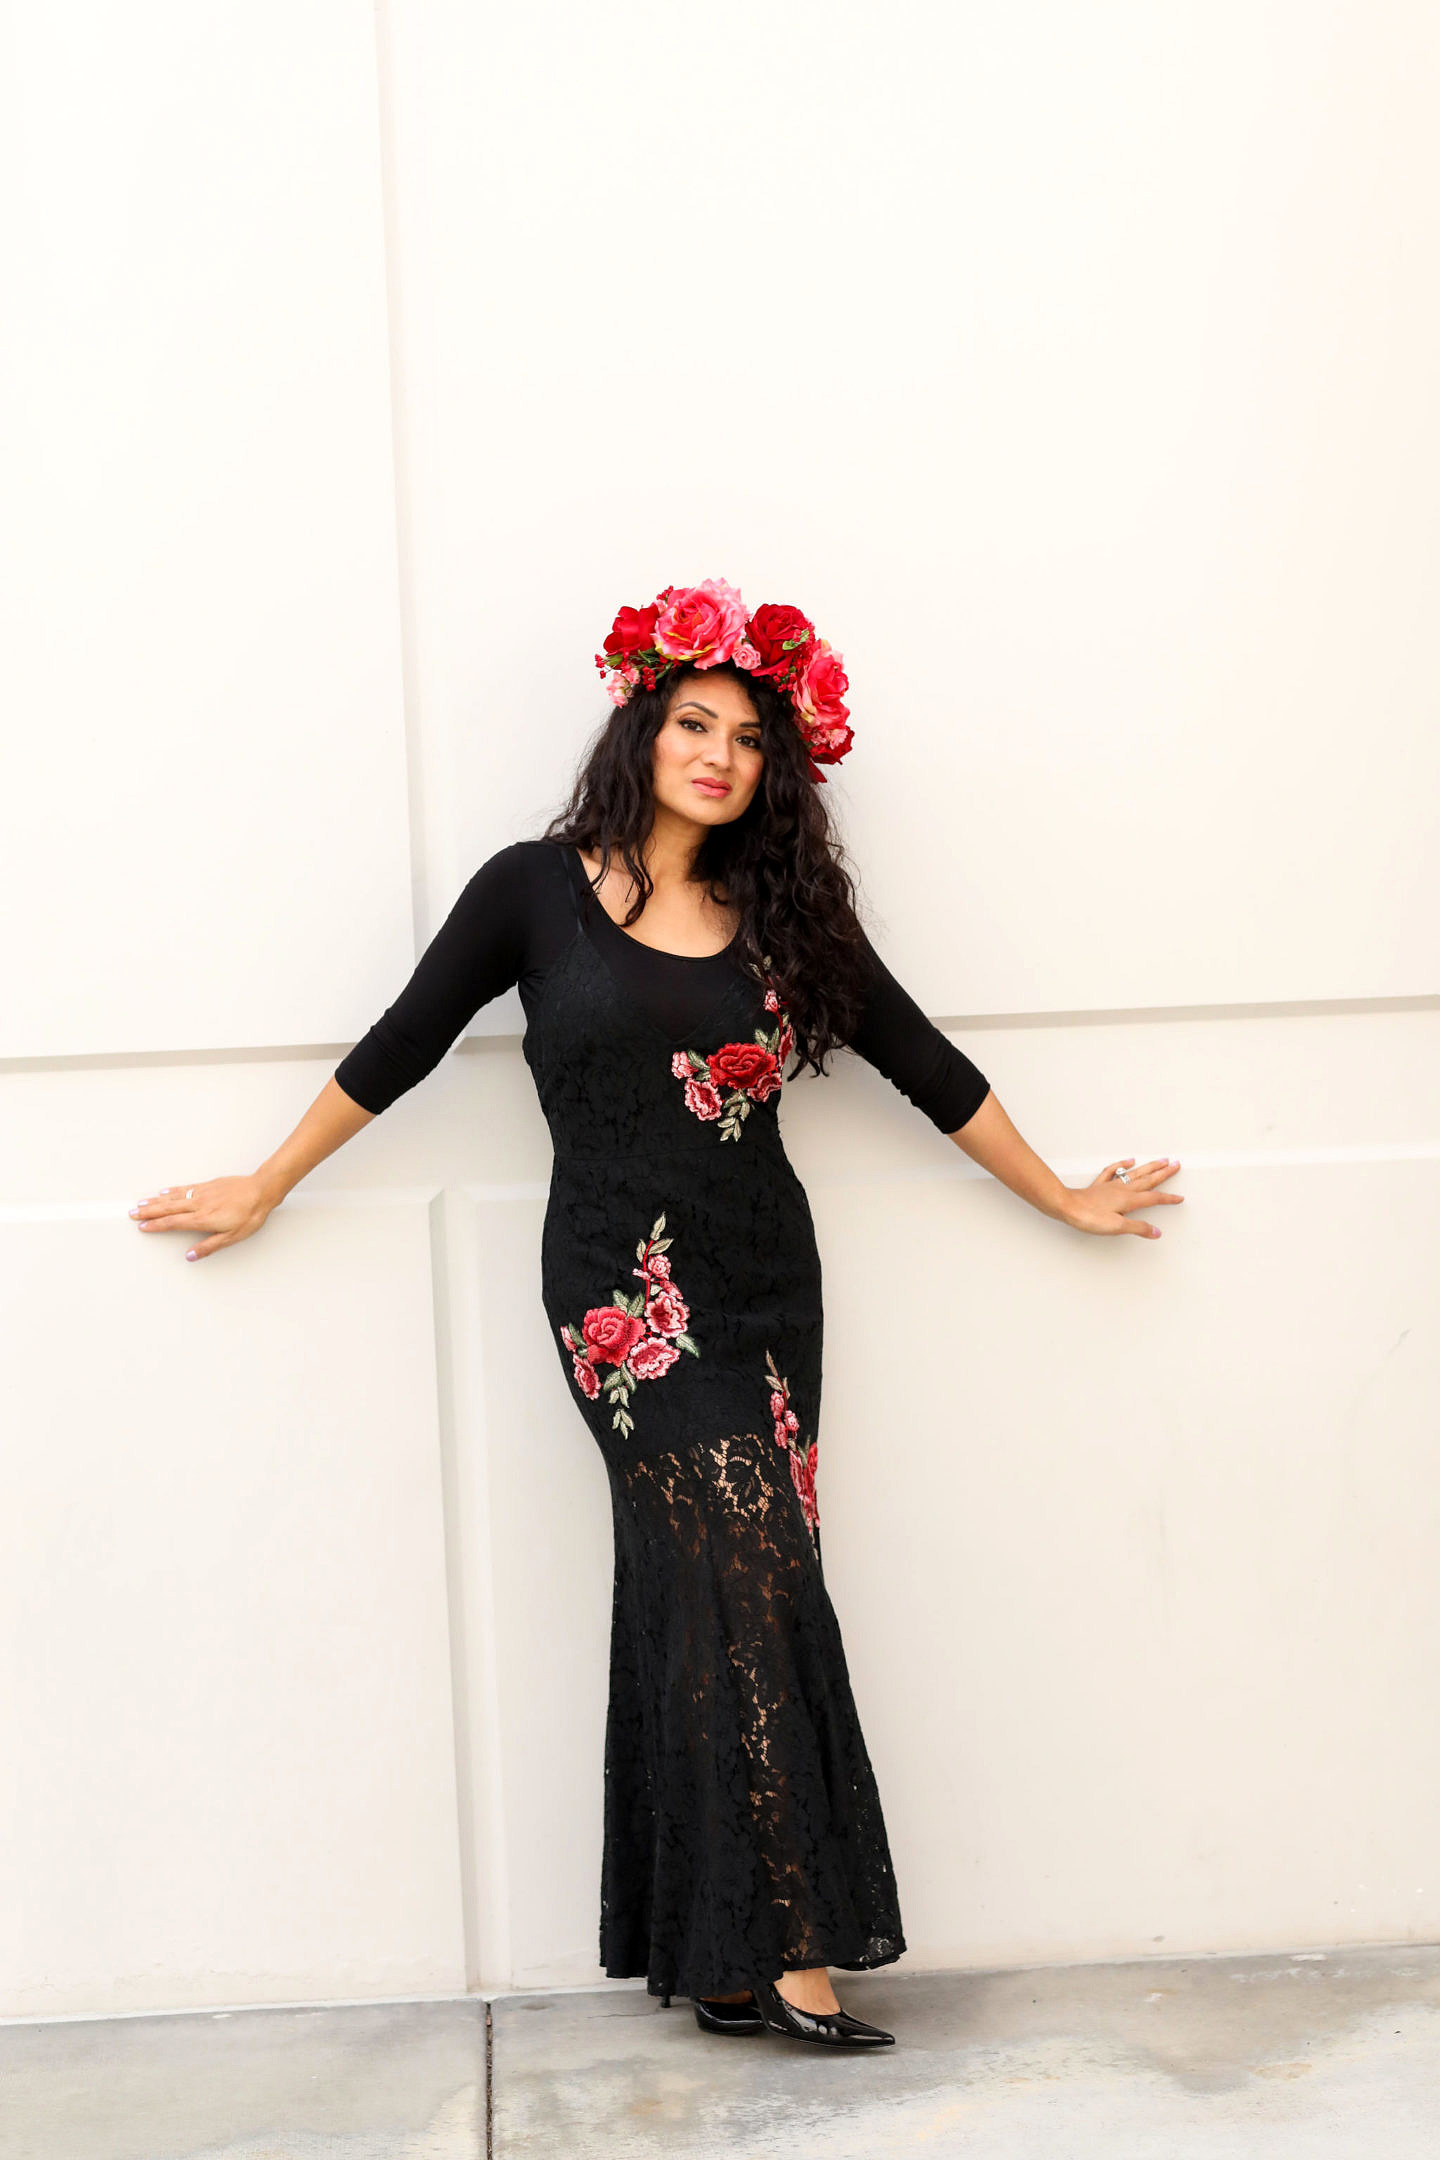 Curious how to wear a Flamenco Dance Dress? Orange County Blogger Debbie Savage is sharing her favorite way to style a Flamenco Dance Dress here!